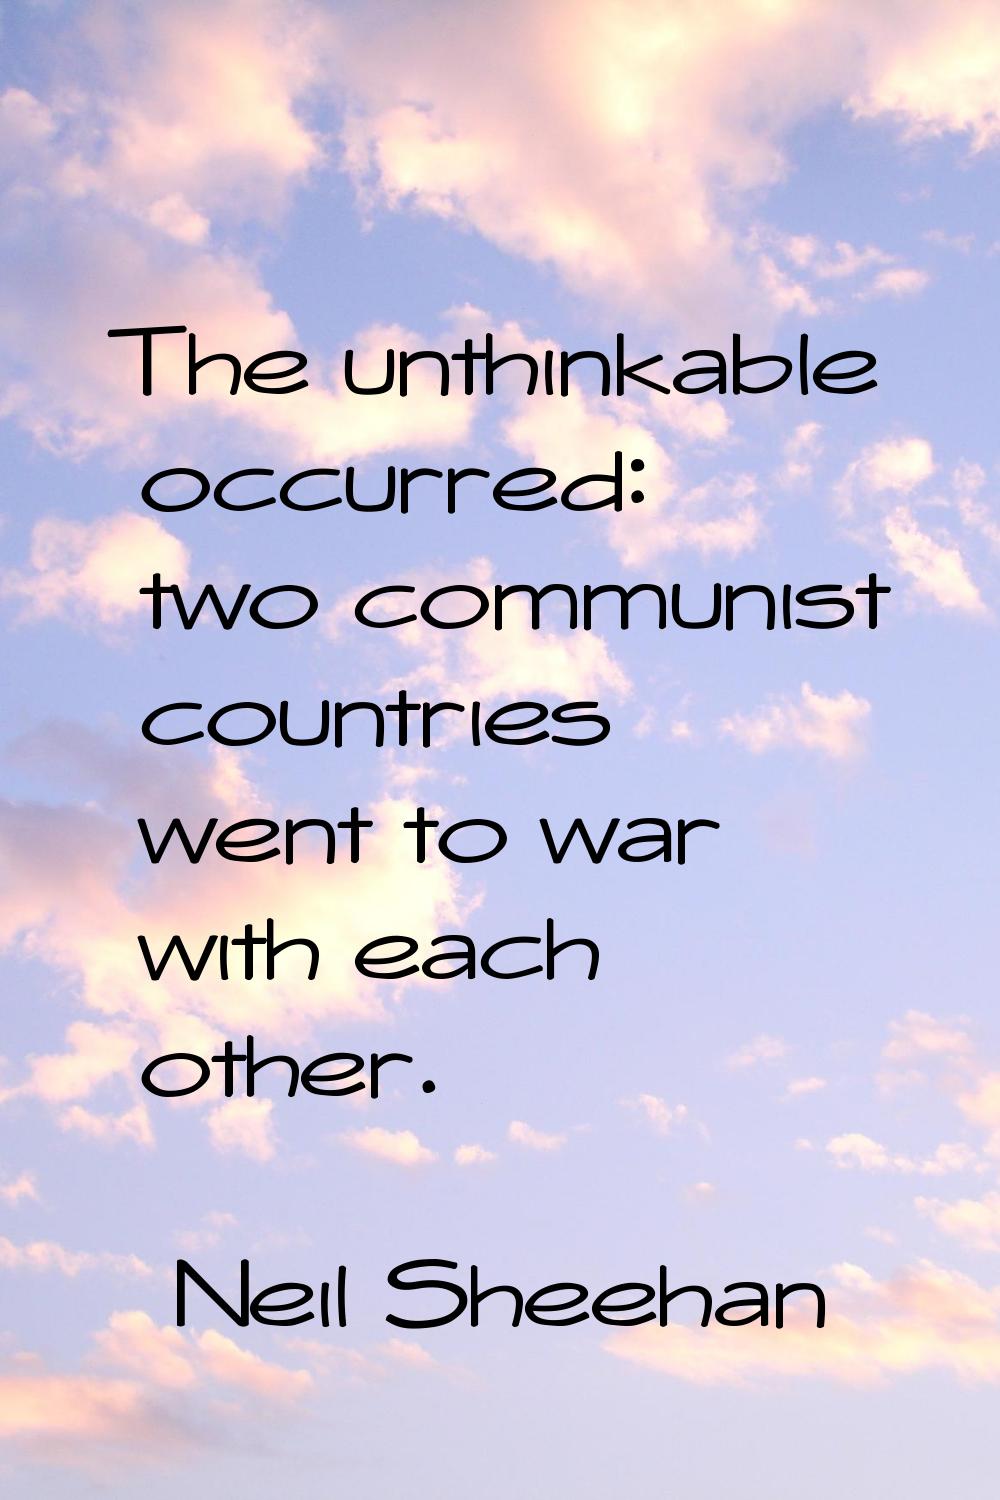 The unthinkable occurred: two communist countries went to war with each other.